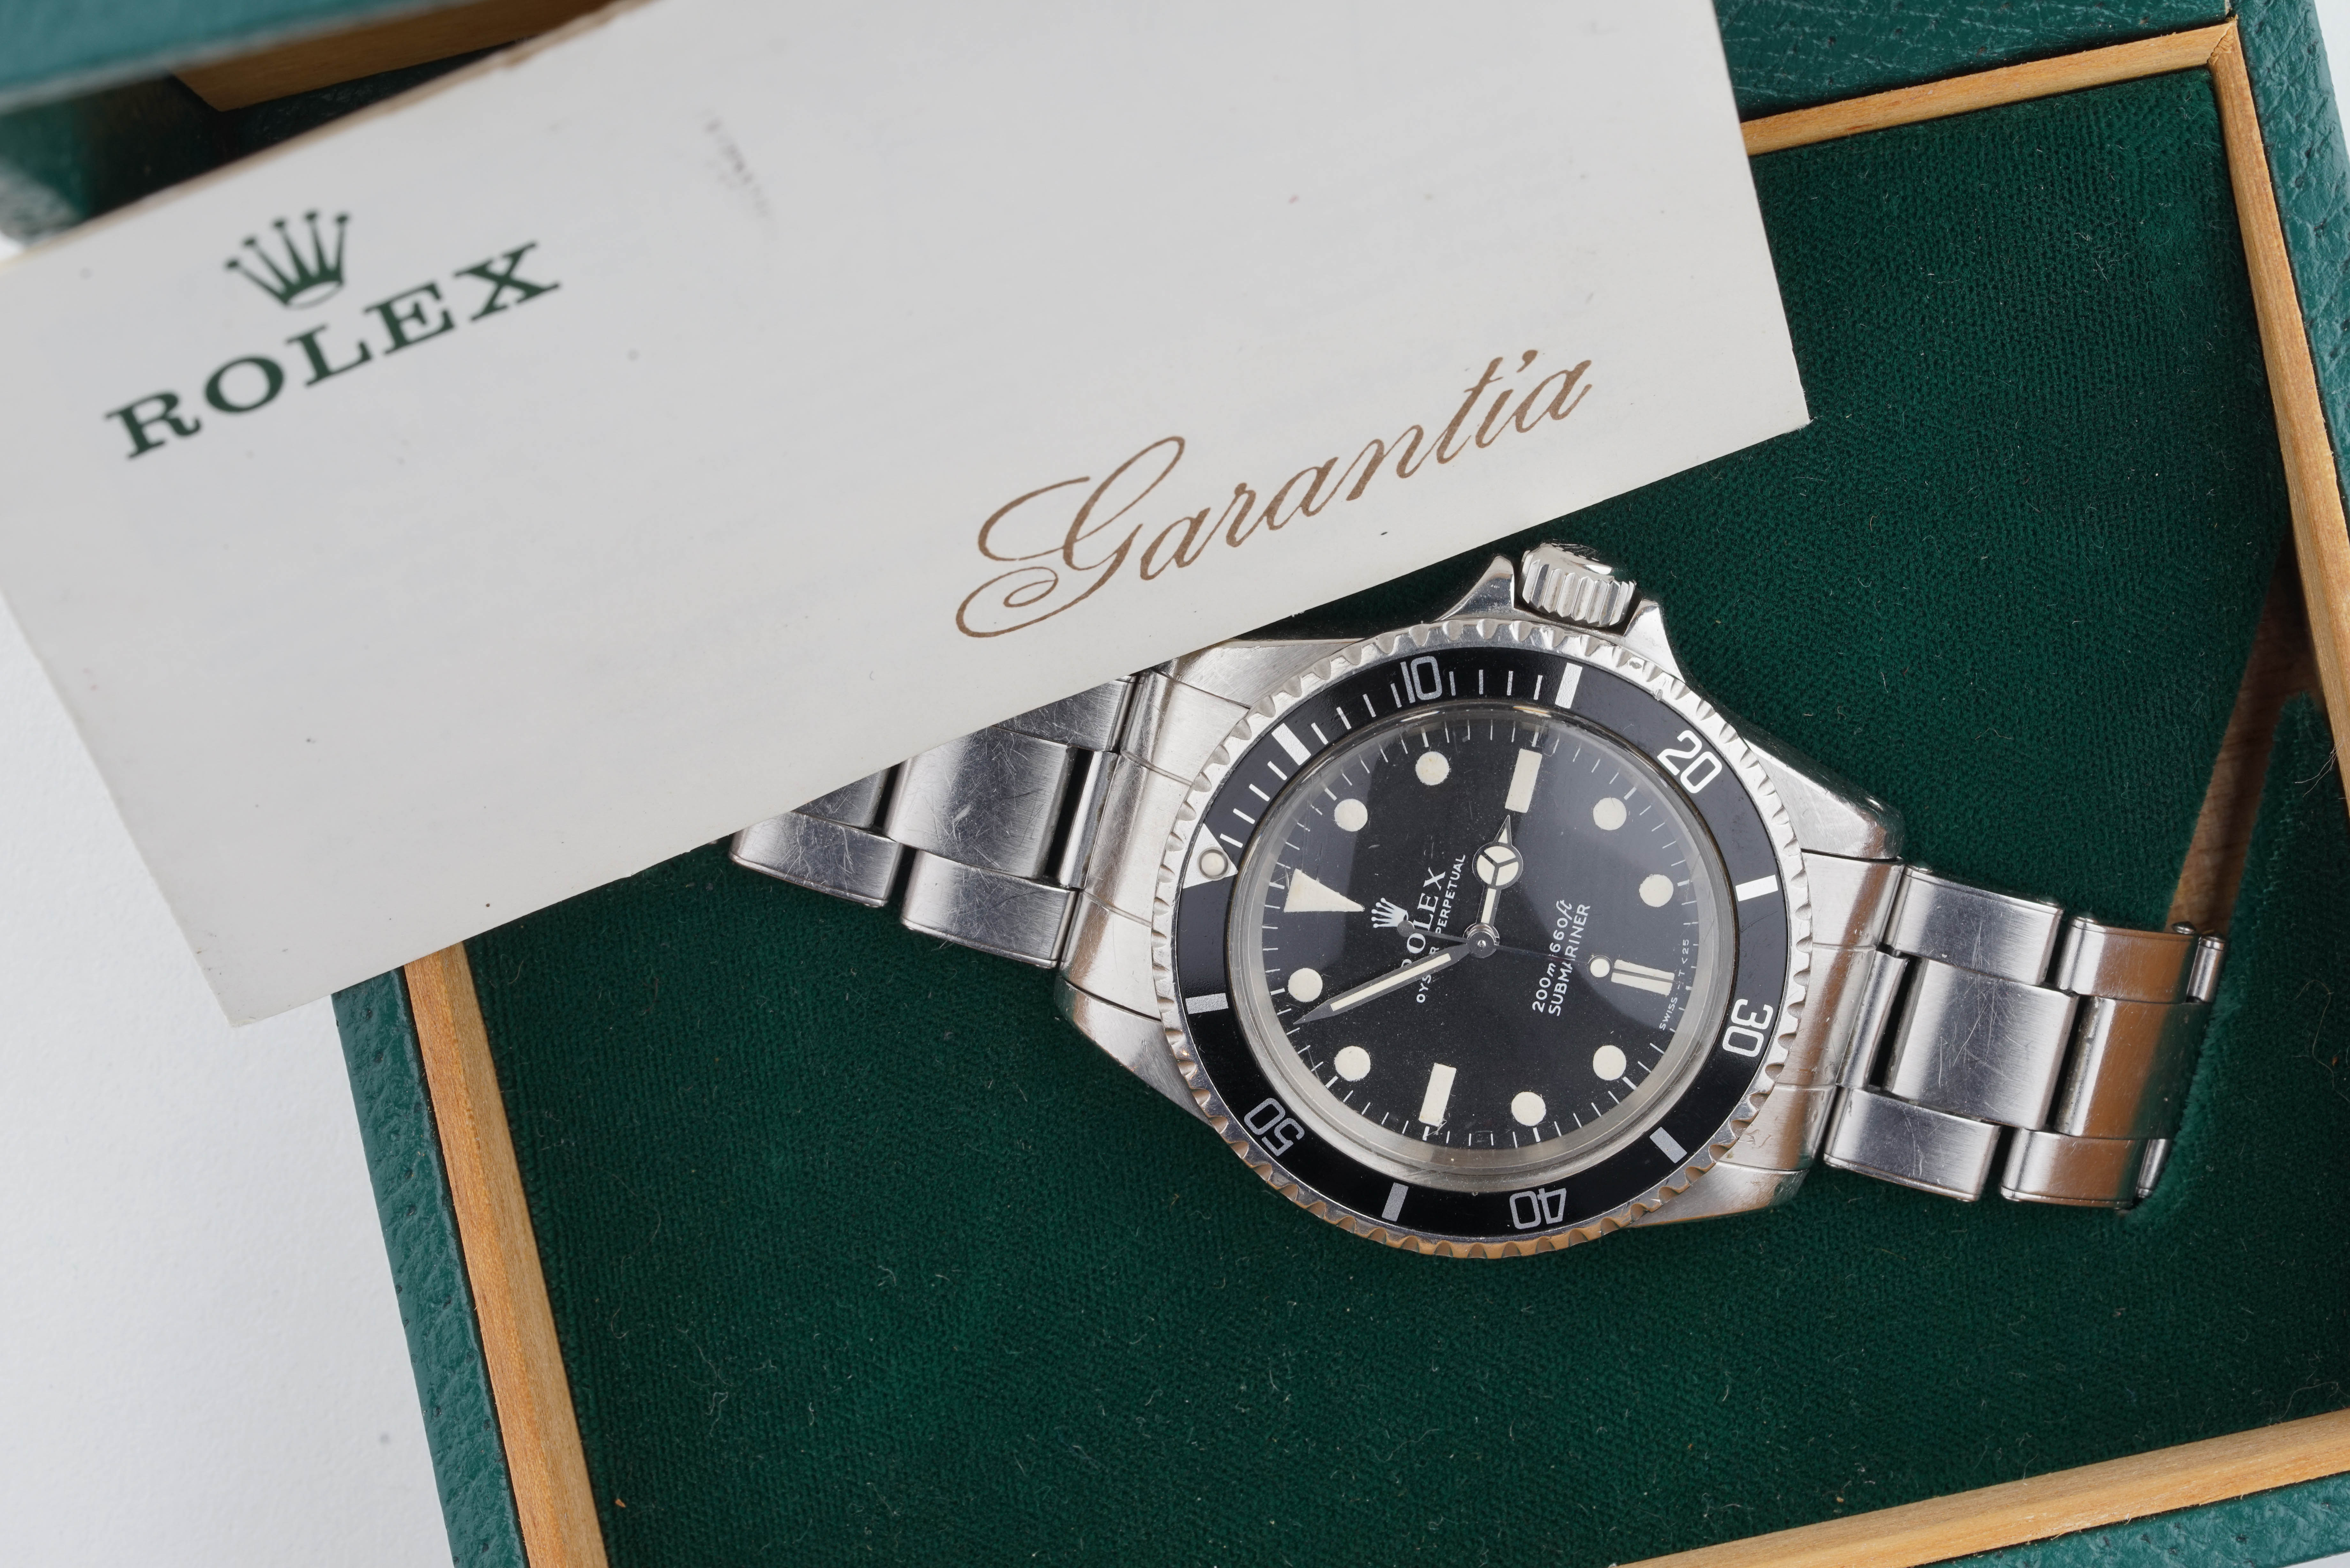 ROLEX OYSTER PERPETUAL SUBMARINER METERS FIRST DIAL 7206 RIVETED BRACELET W/ BOX & PAPERS REF. - Image 3 of 11